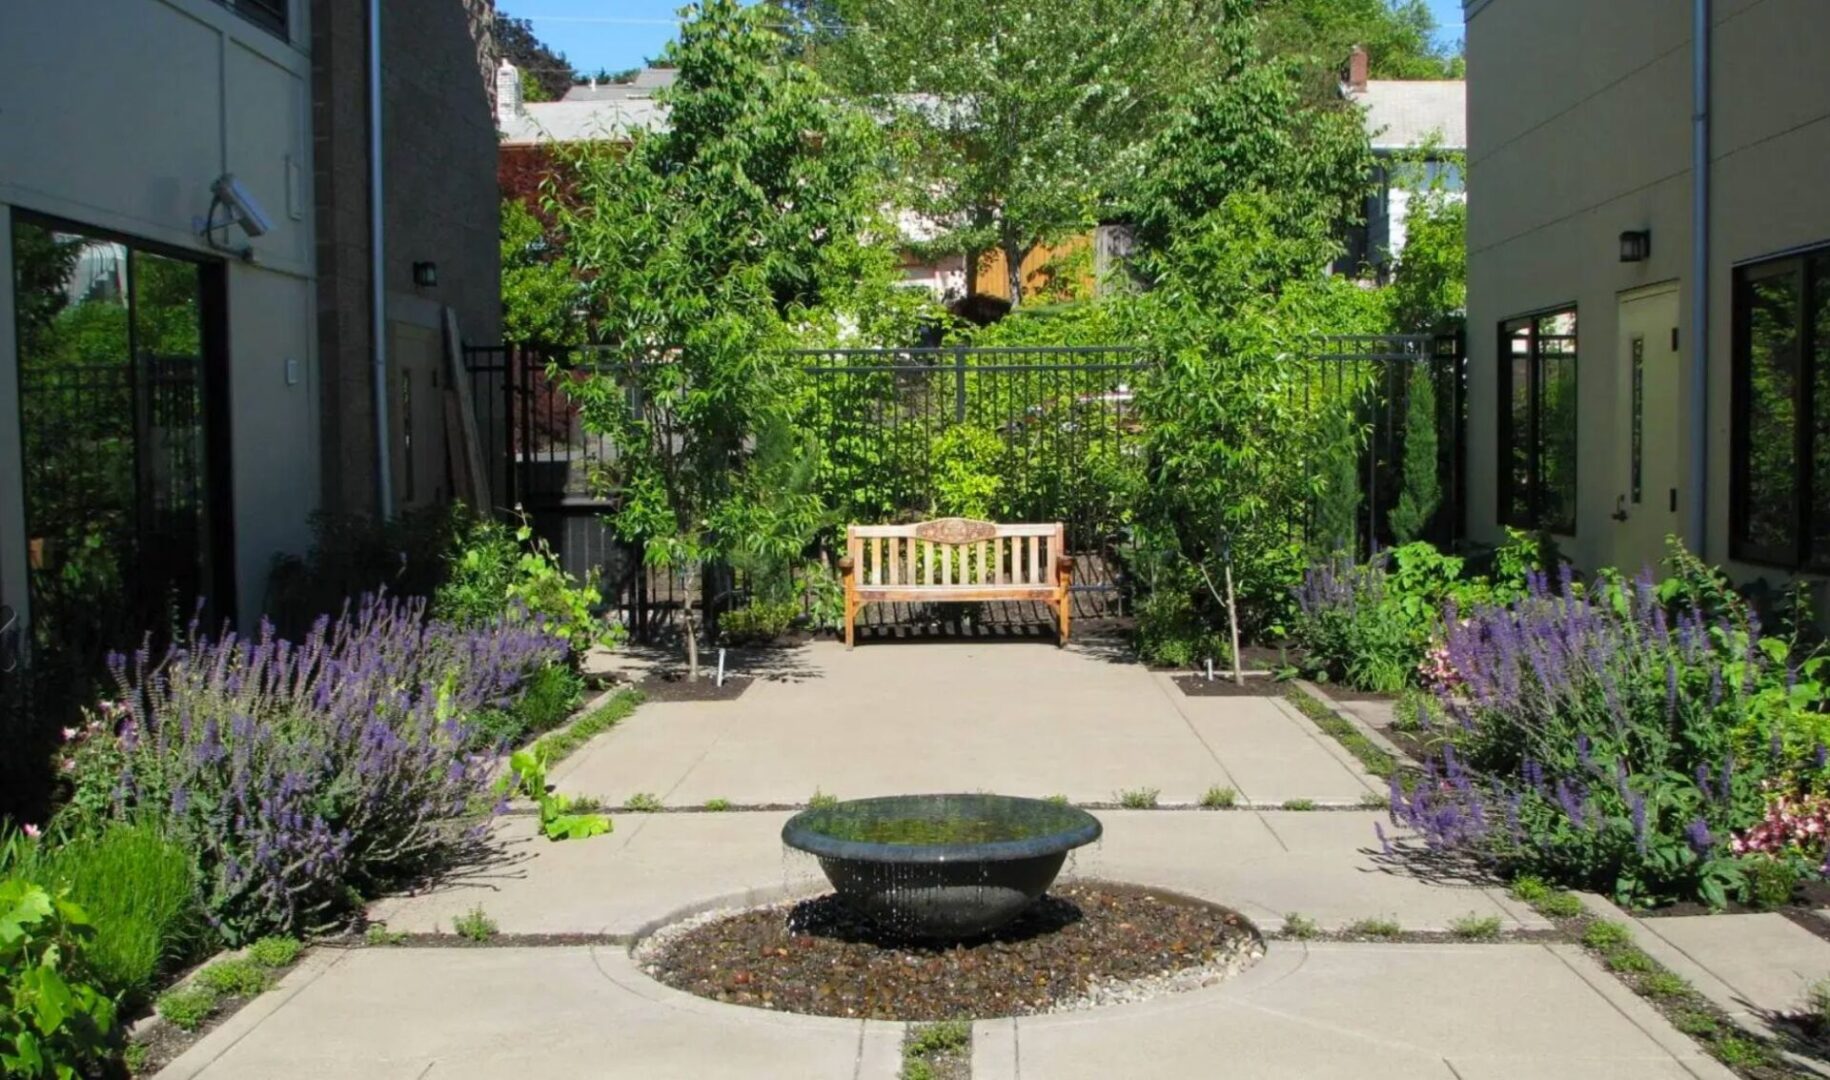 A garden with benches and trees in the background.